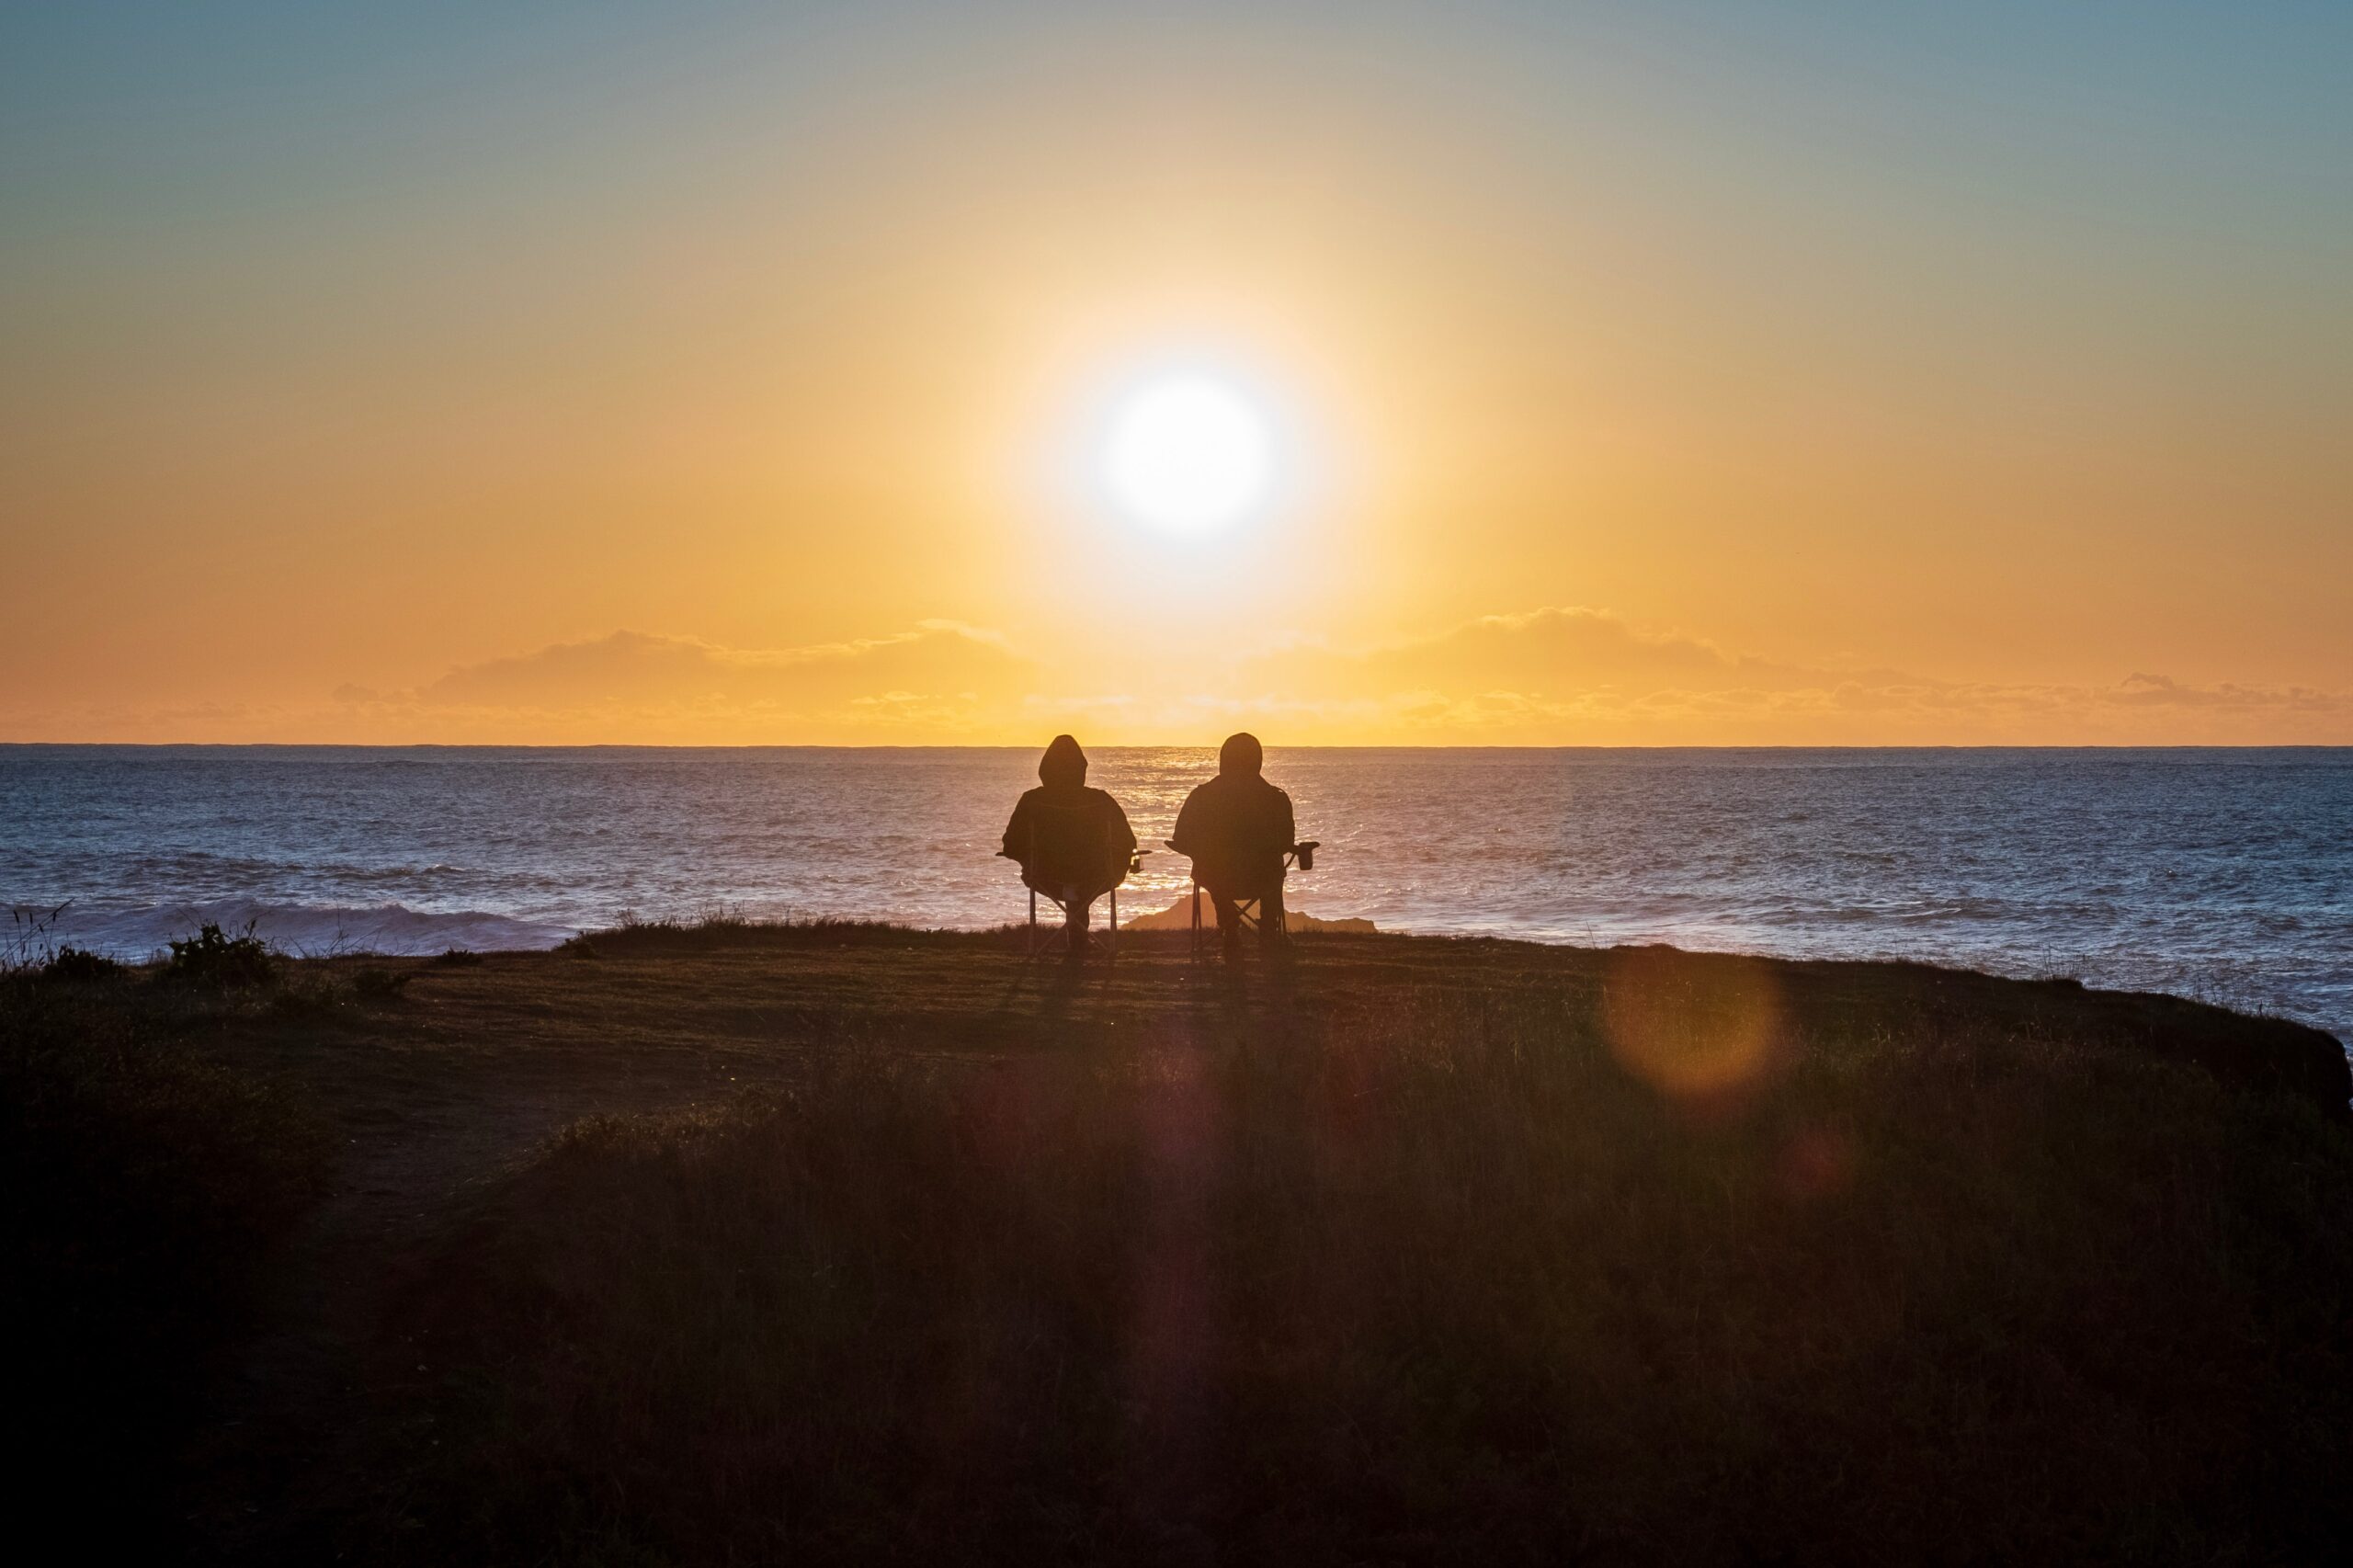 Retired couple sitting on chairs overlooking the ocean at sunset.